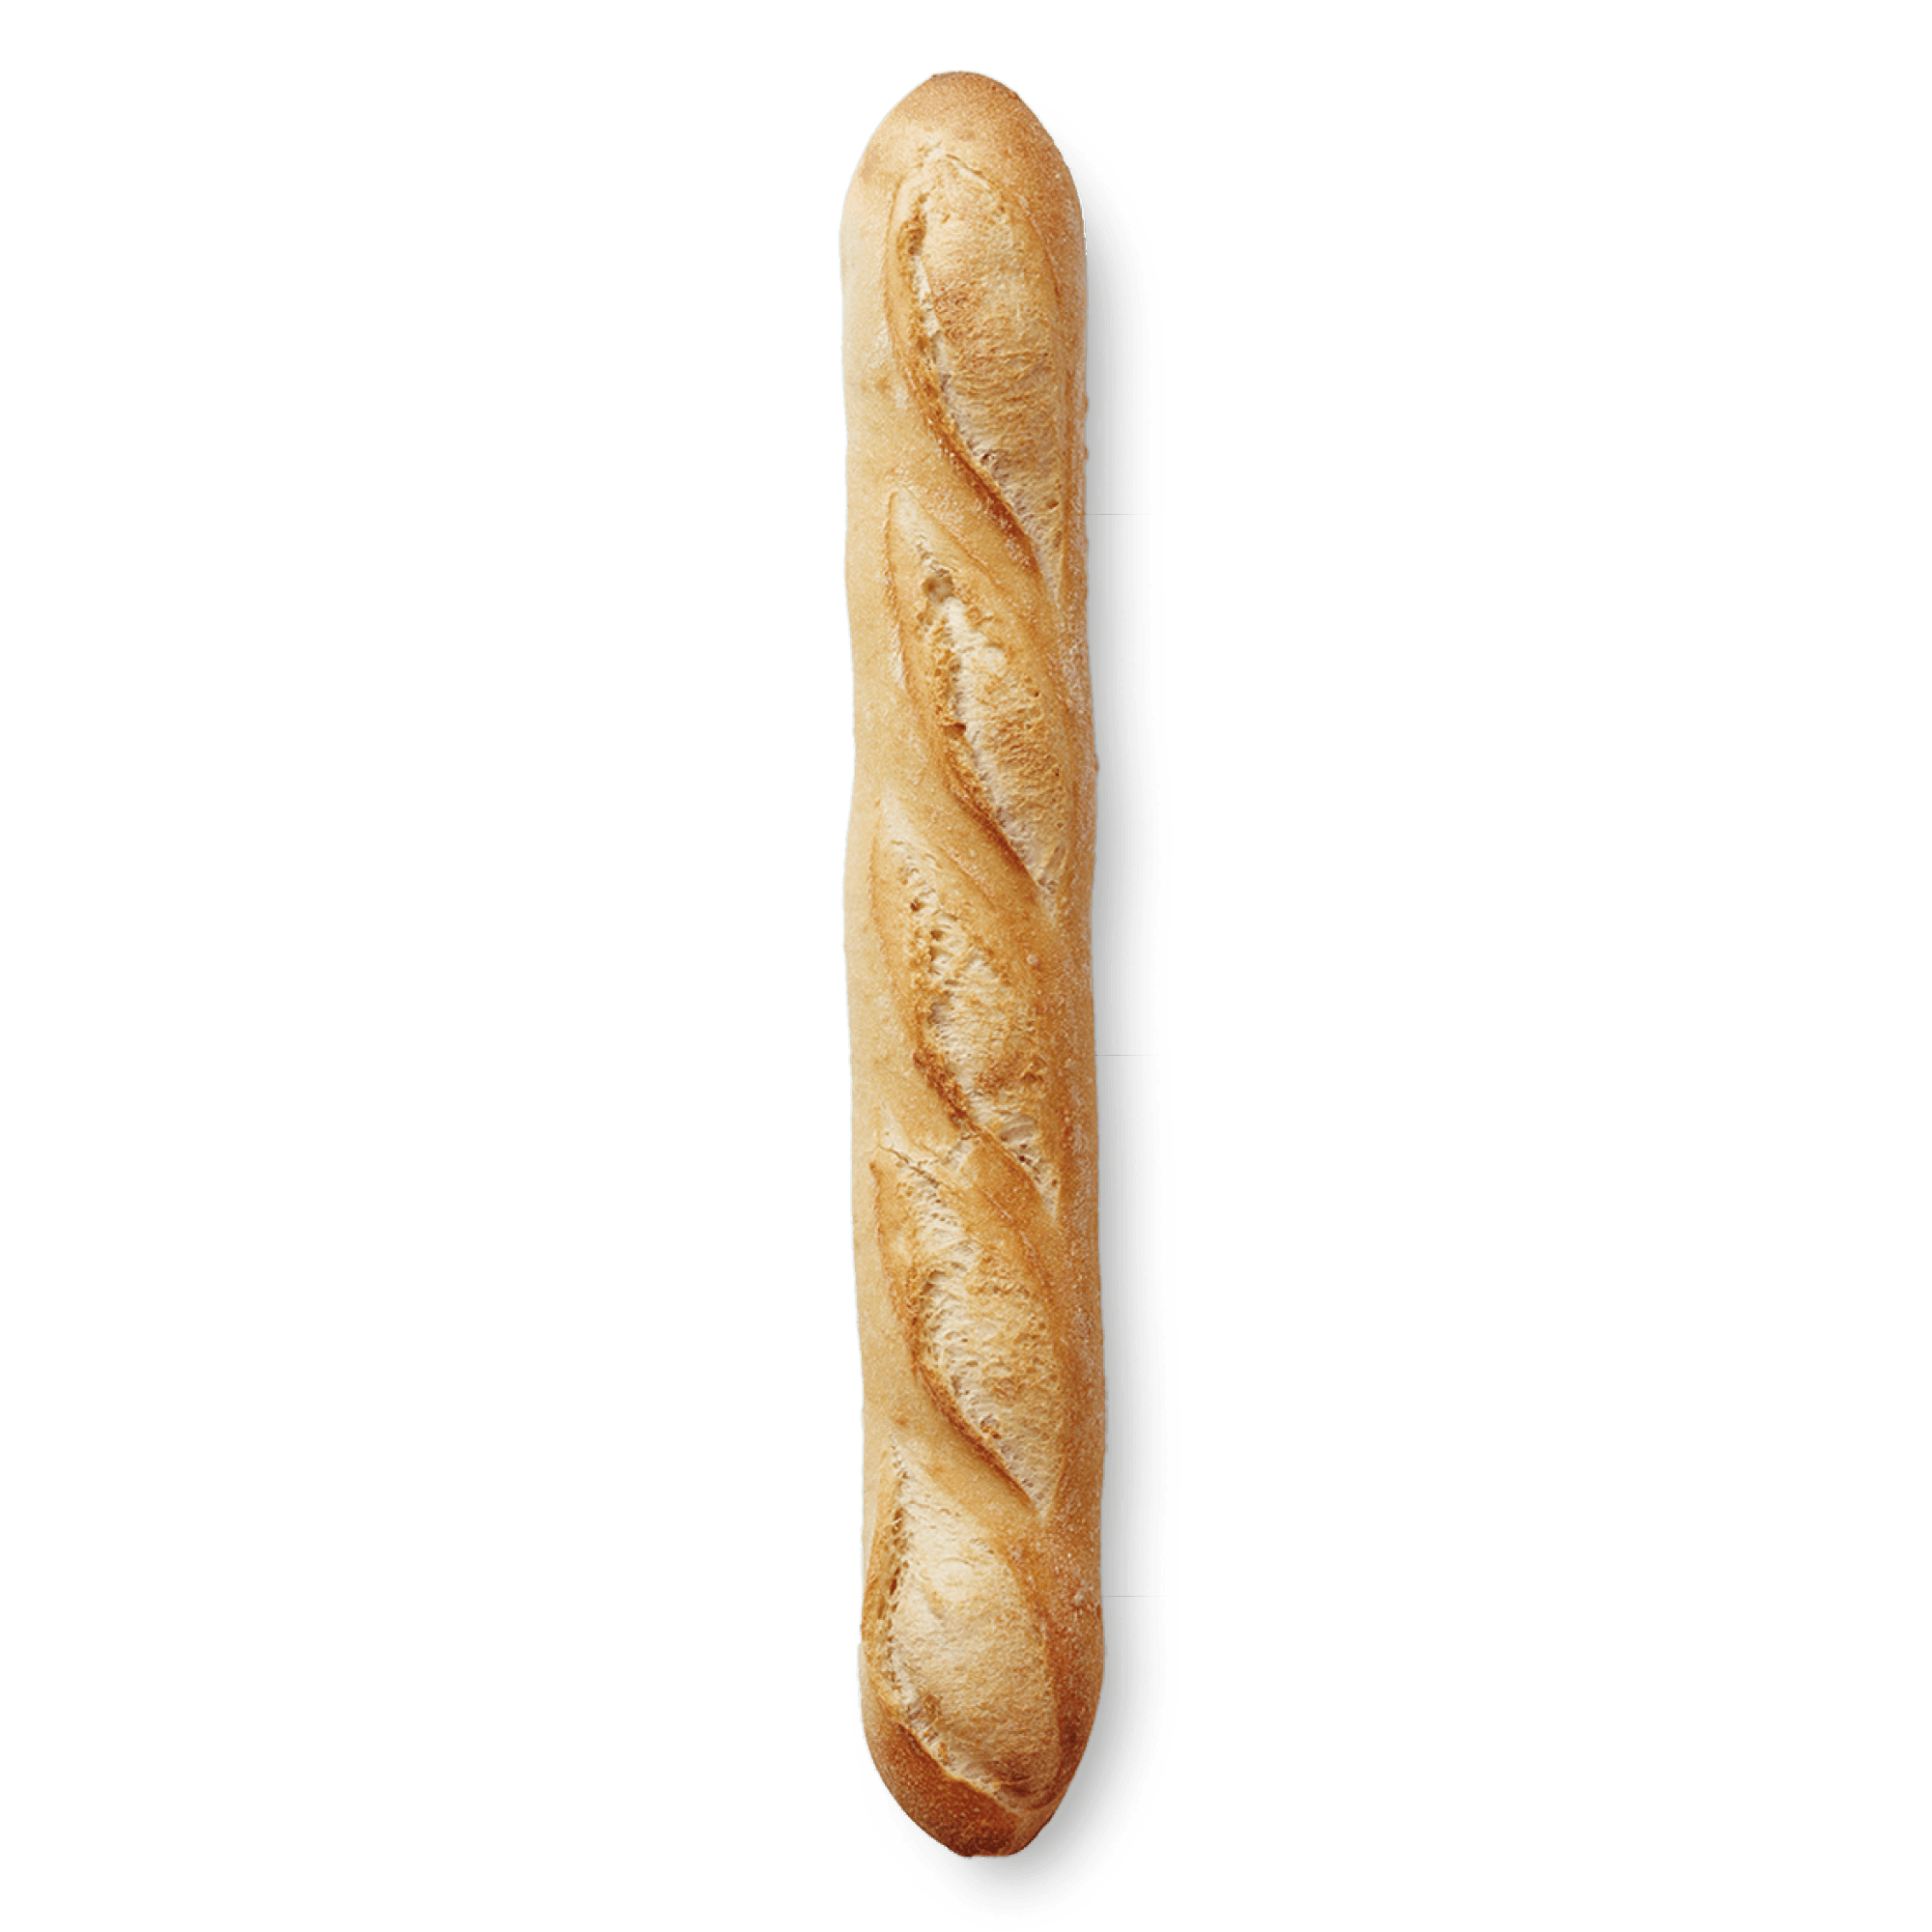 Tradition Baguette - Savory Gourmet